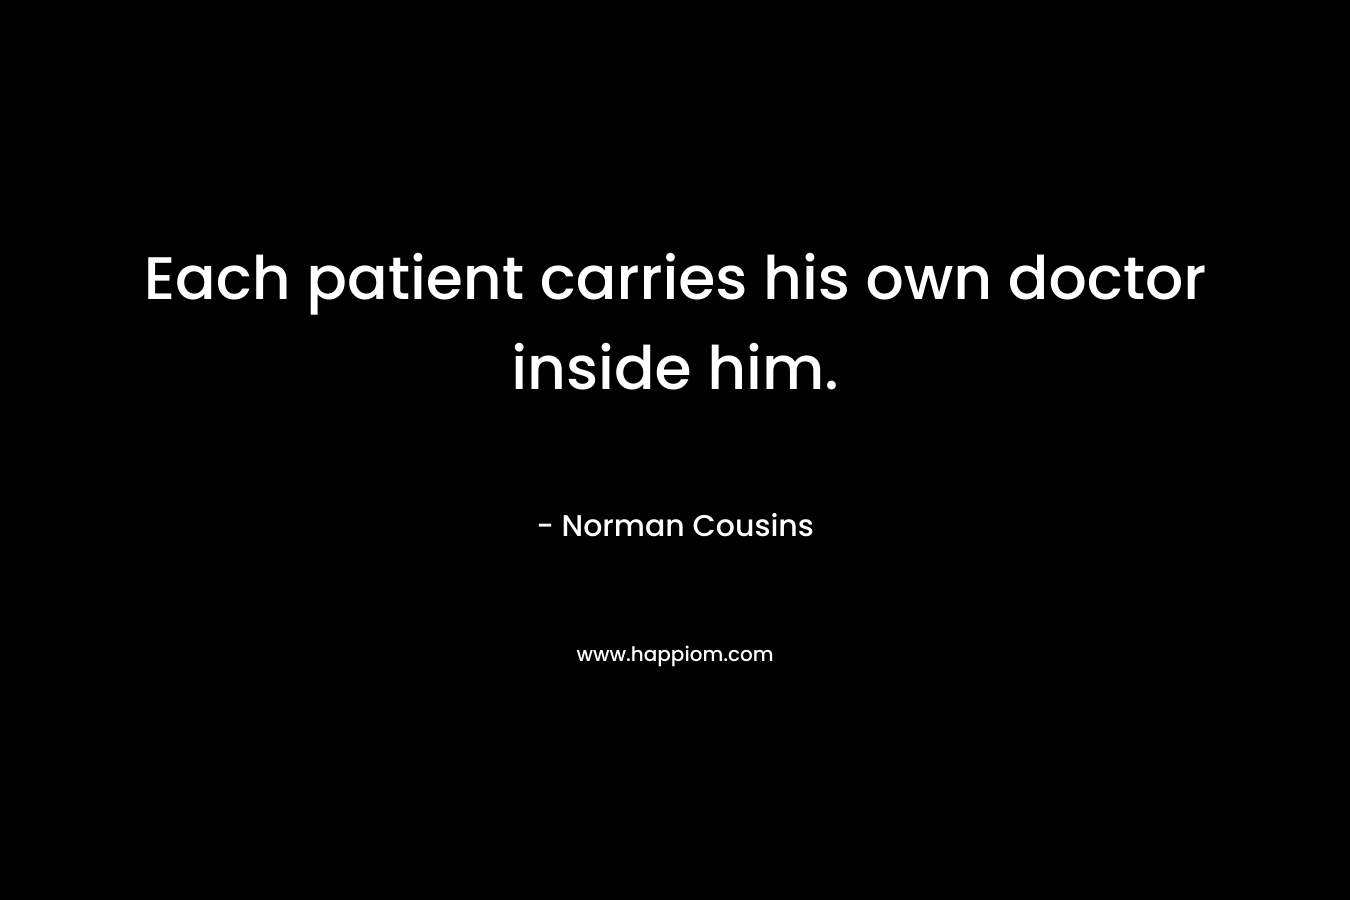 Each patient carries his own doctor inside him.